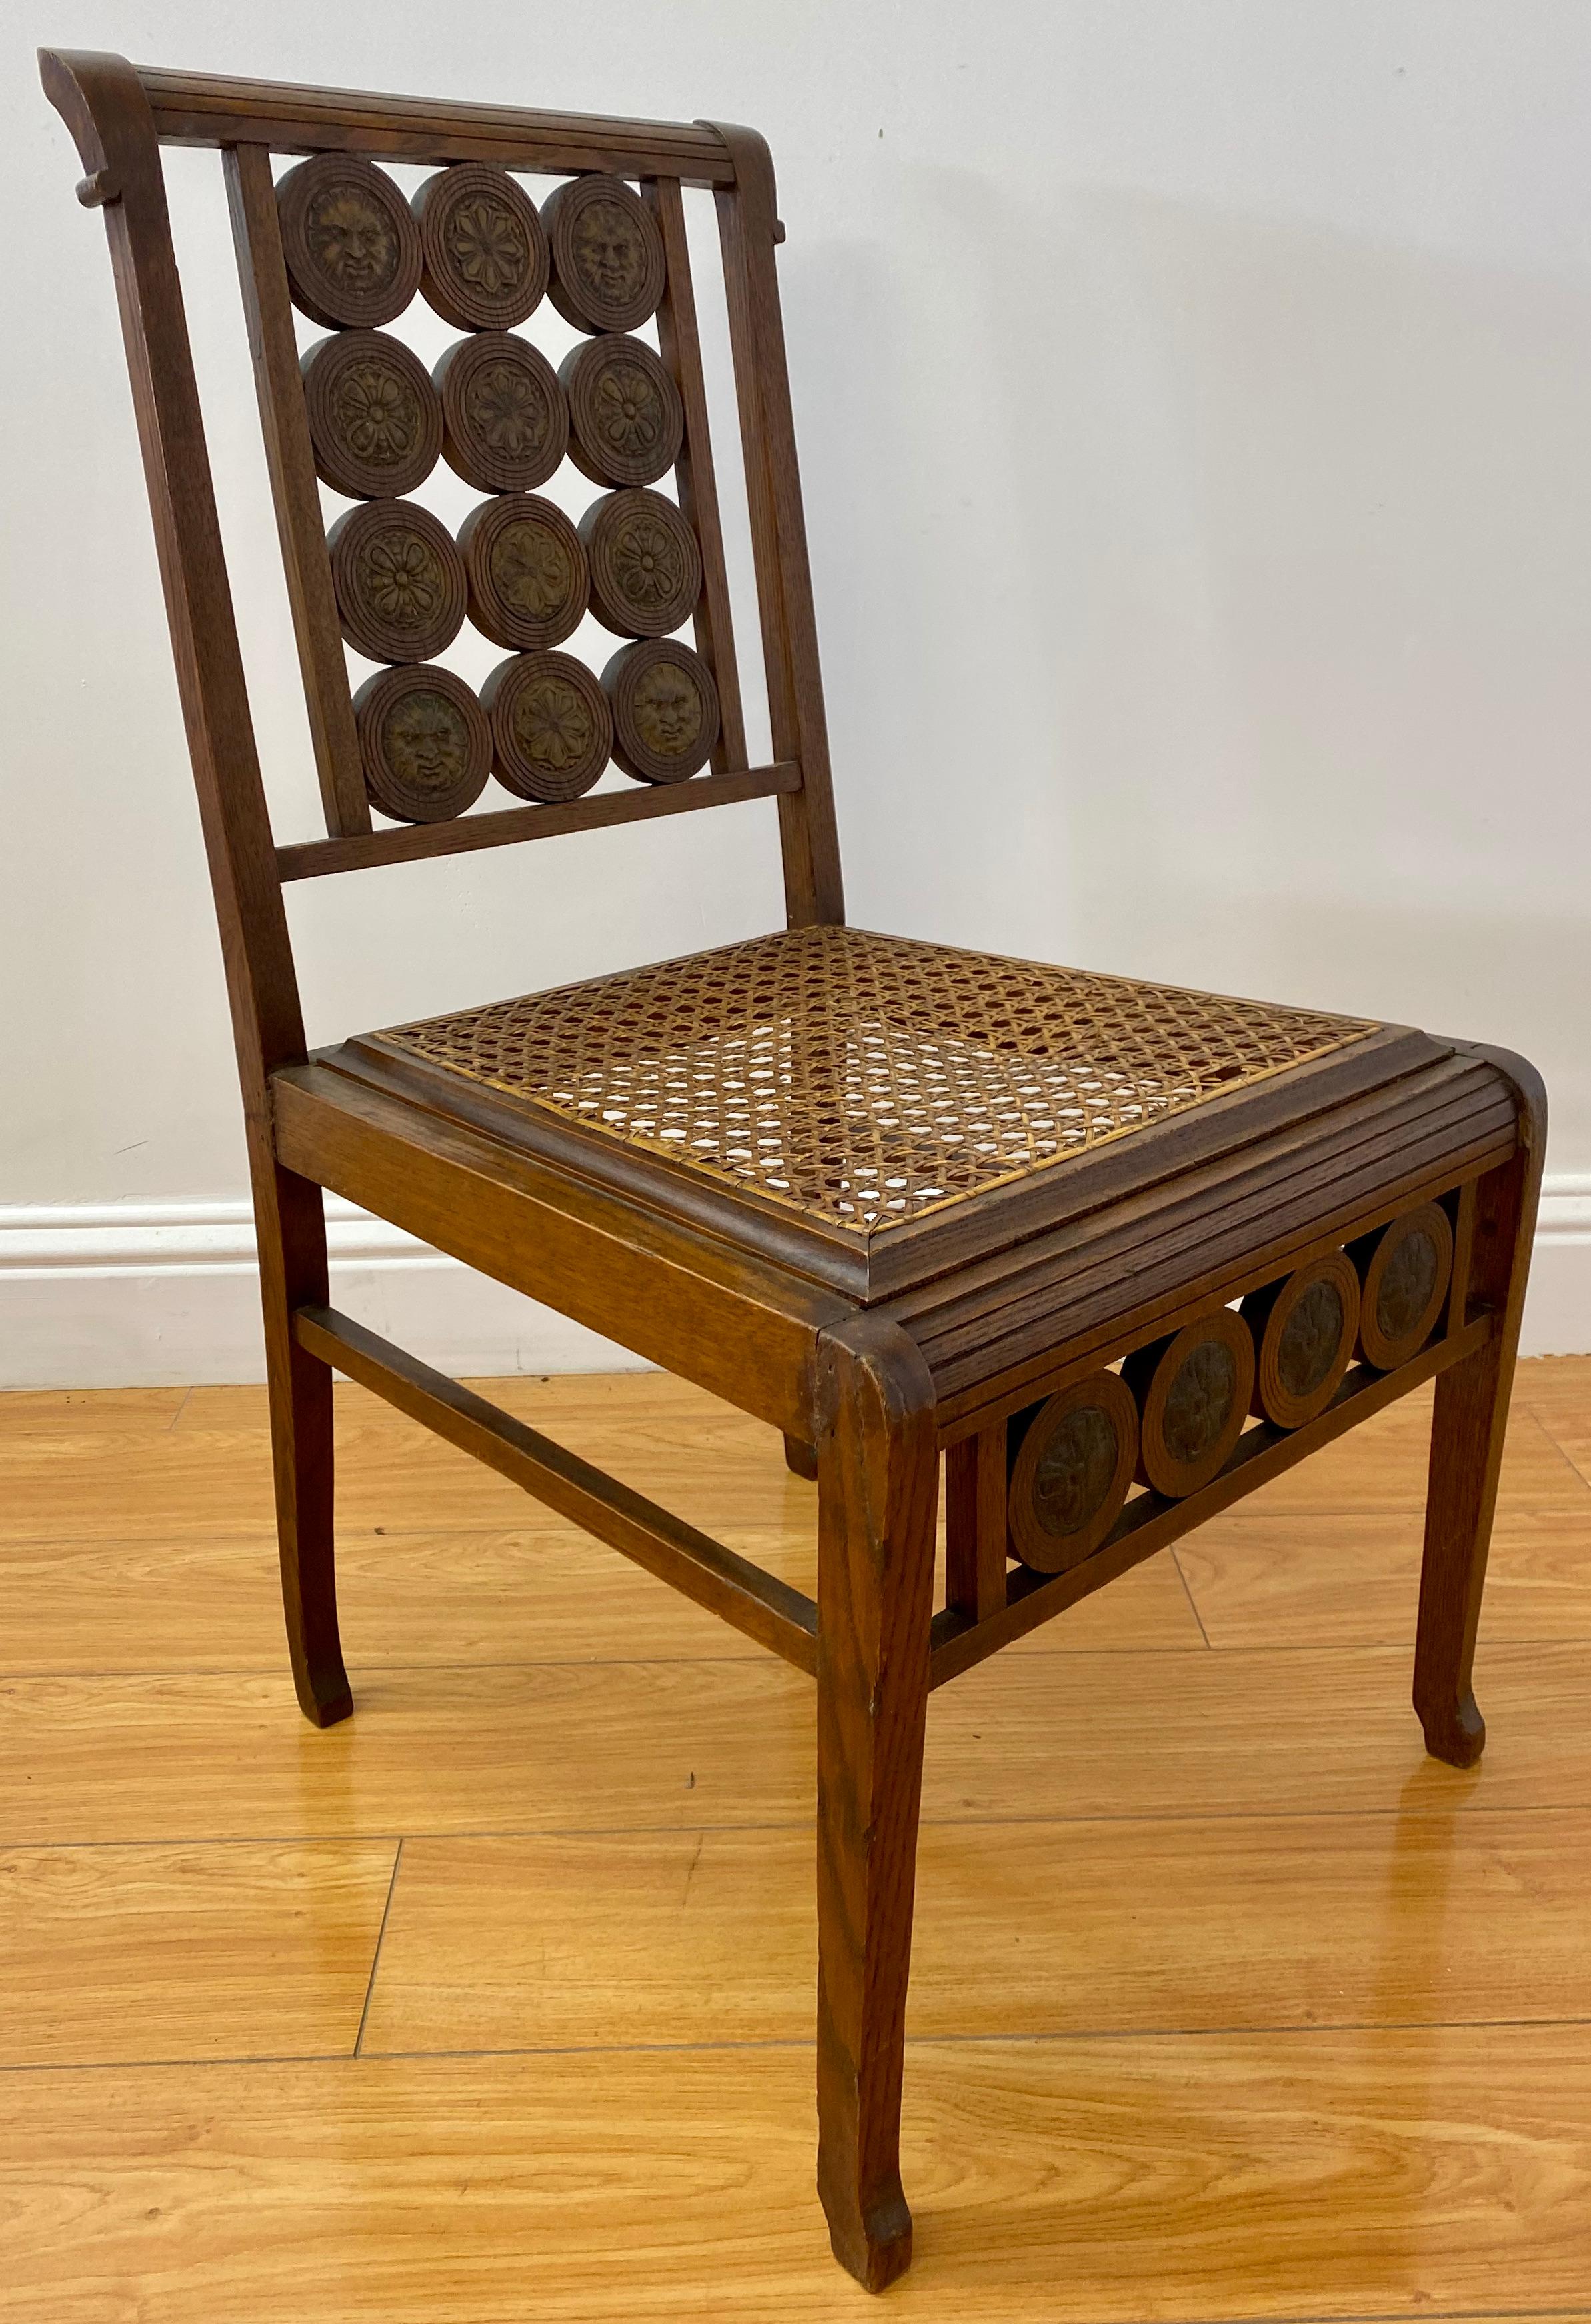 Hand-Carved Arts & Crafts Hand Carved Sun & Flower Medallion Side Chair with Wicker Seat